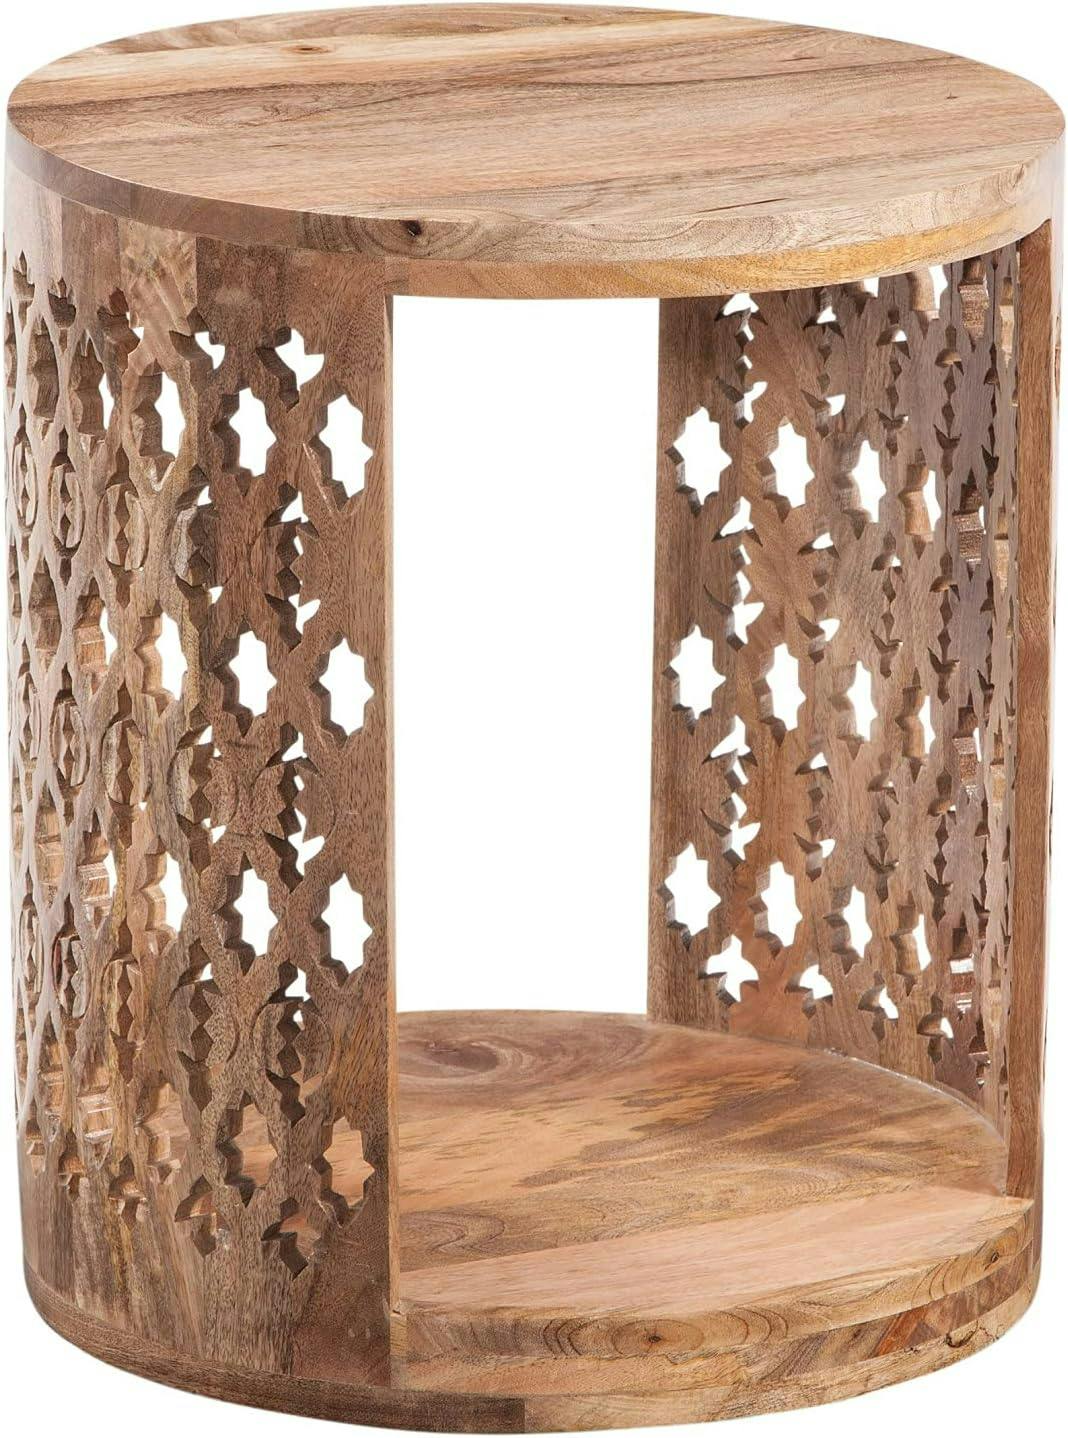 Brinley Hand-Carved Rosette Round End Table in Natural Mango Wood